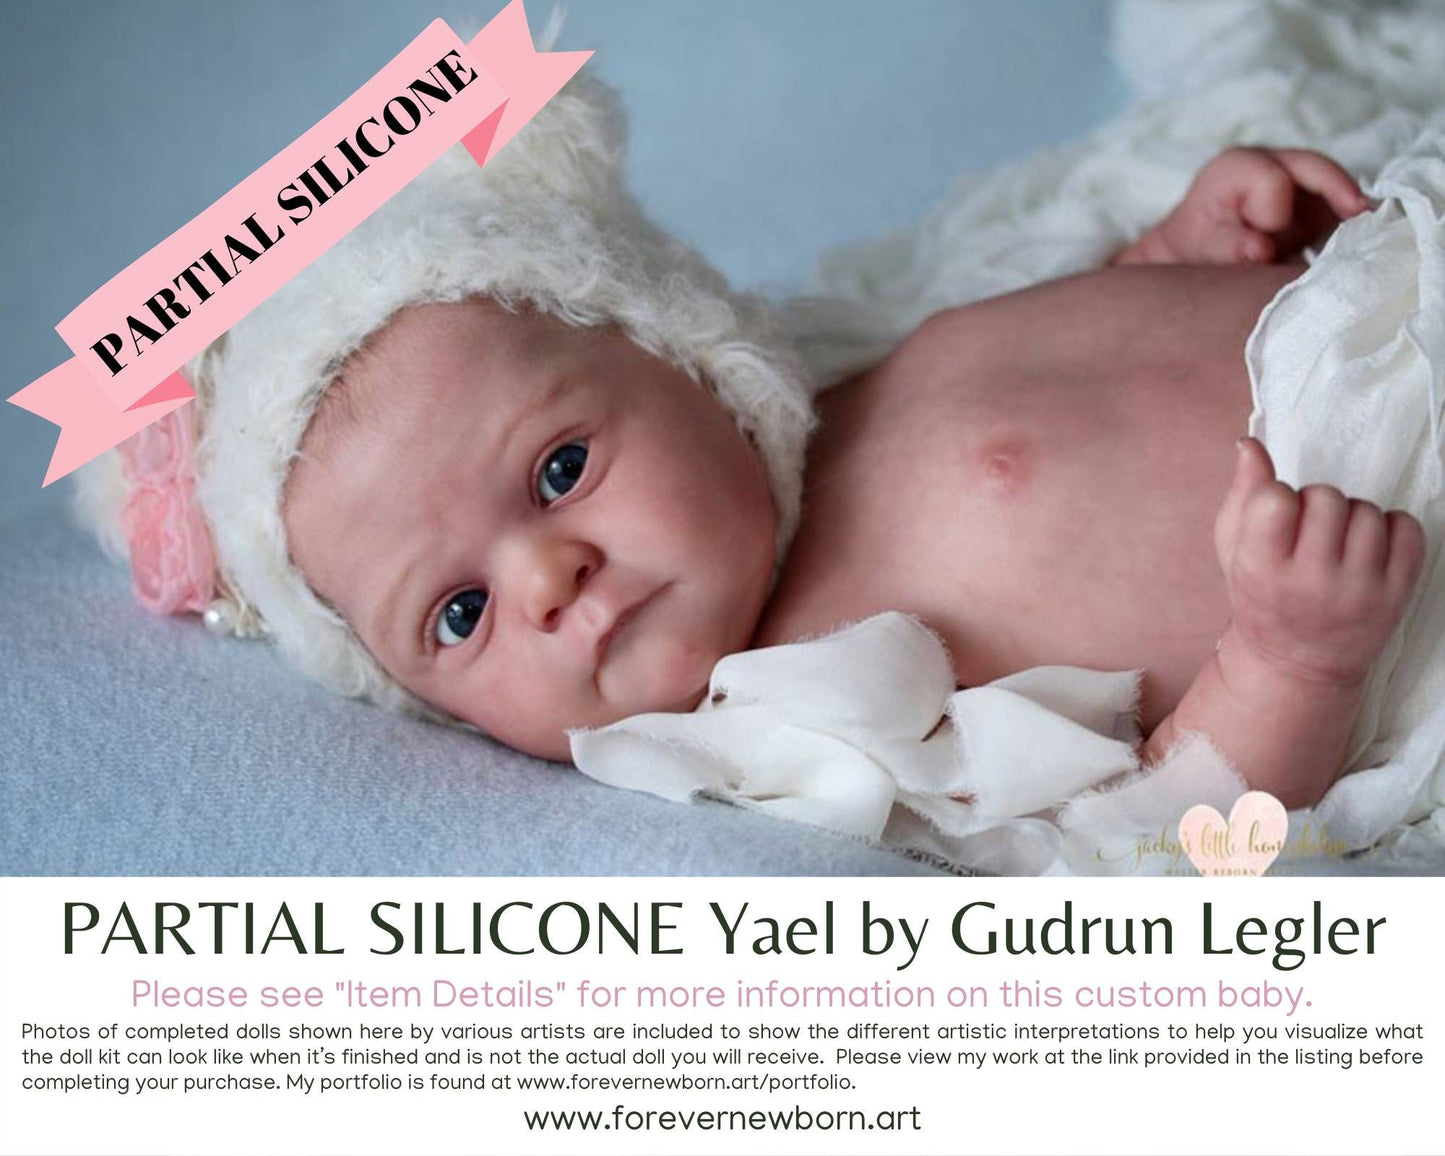 SiLiCoNe BaBy Yael by Gudrun Legler (20"+ Full Limbs) with cloth body. Extended Processing Time May Be Required. ASK FIRST!